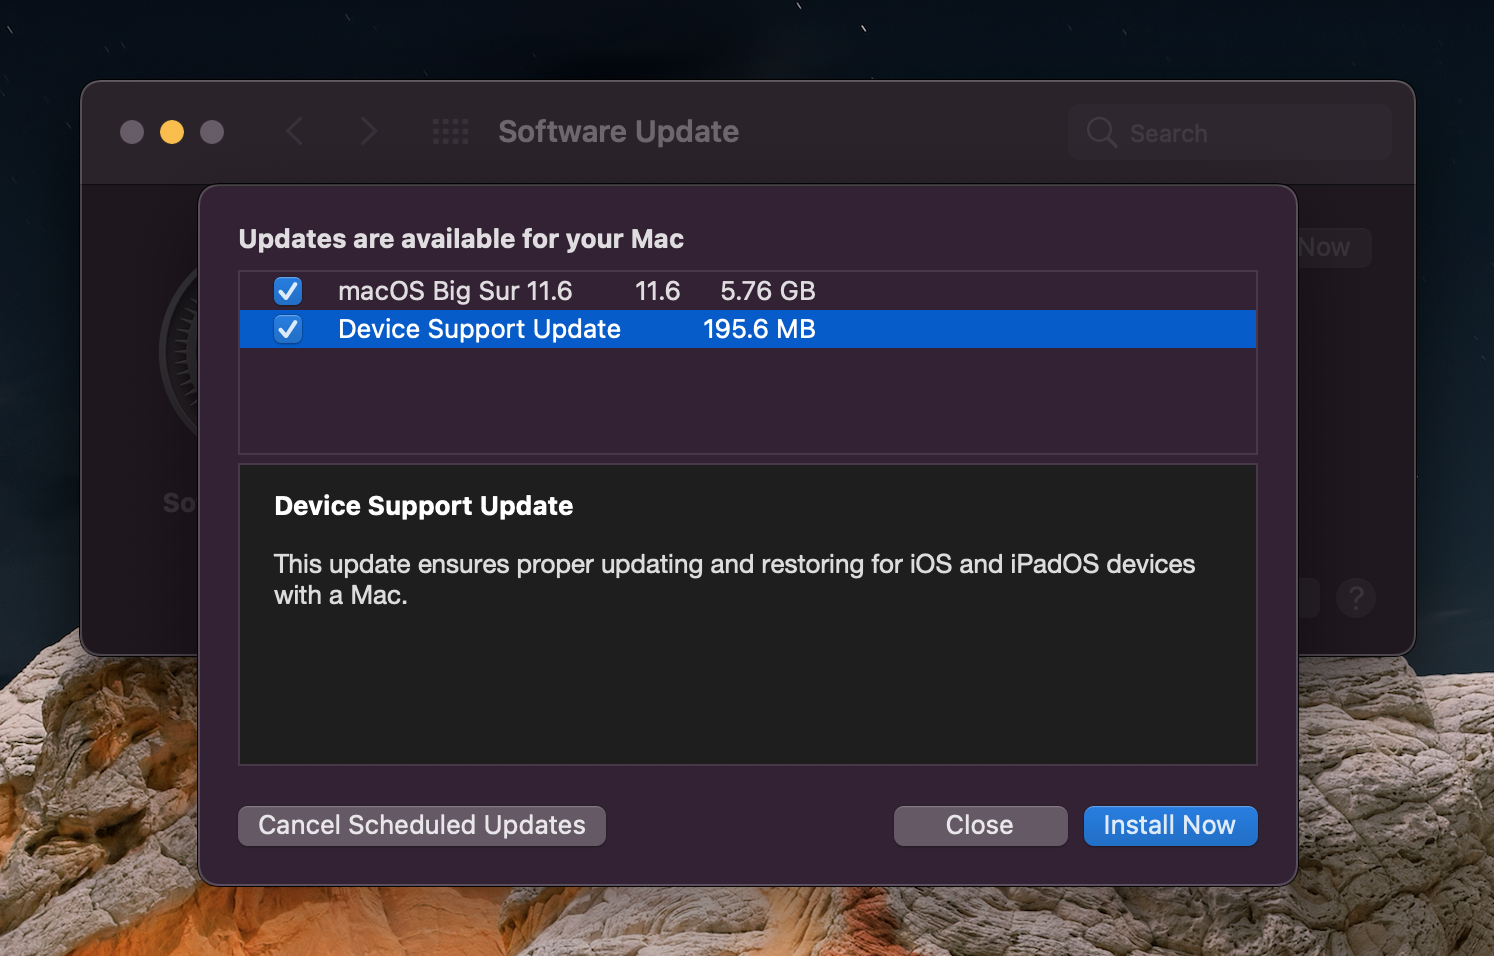 Your device not supported. Macos big sur 11.6.1 installer Dmg Retakan. Mac supported. Update to devices.